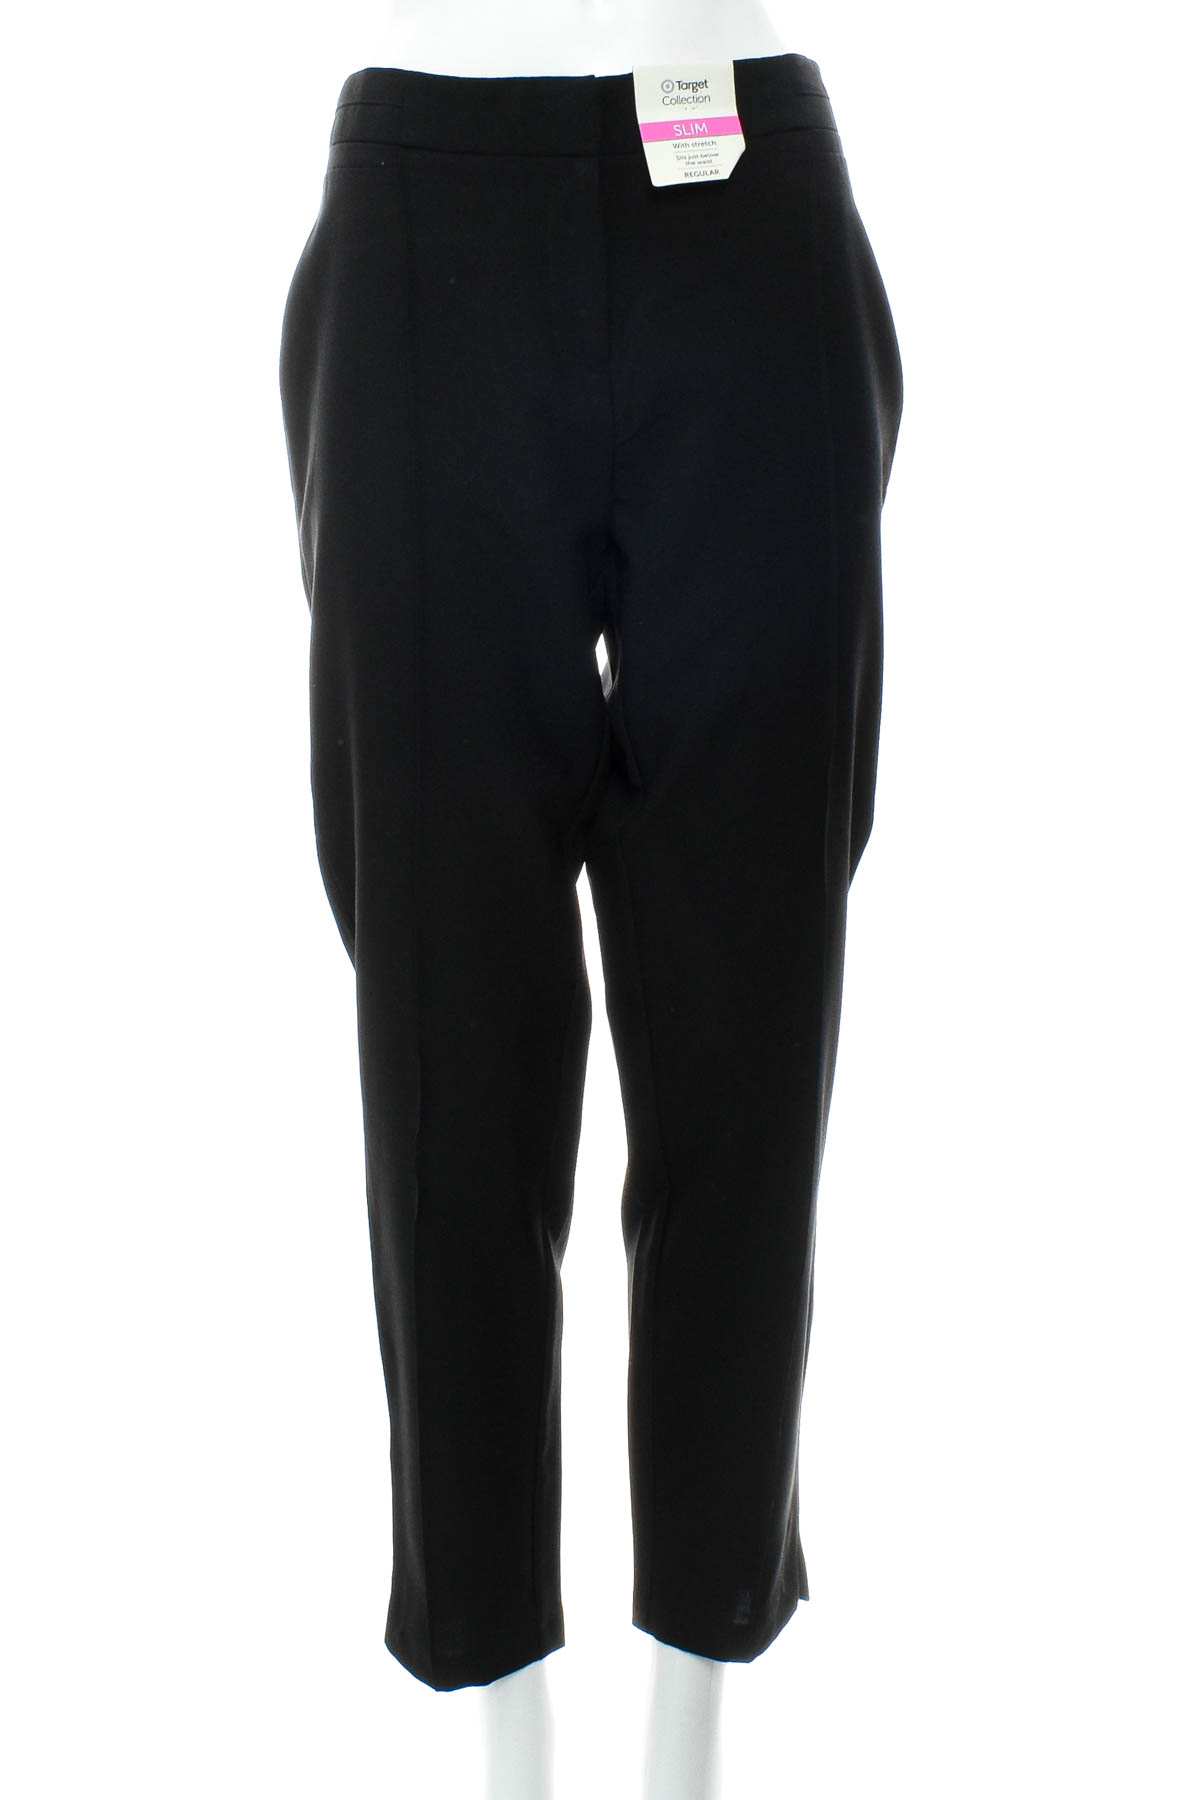 Women's trousers - Target Collection - 0